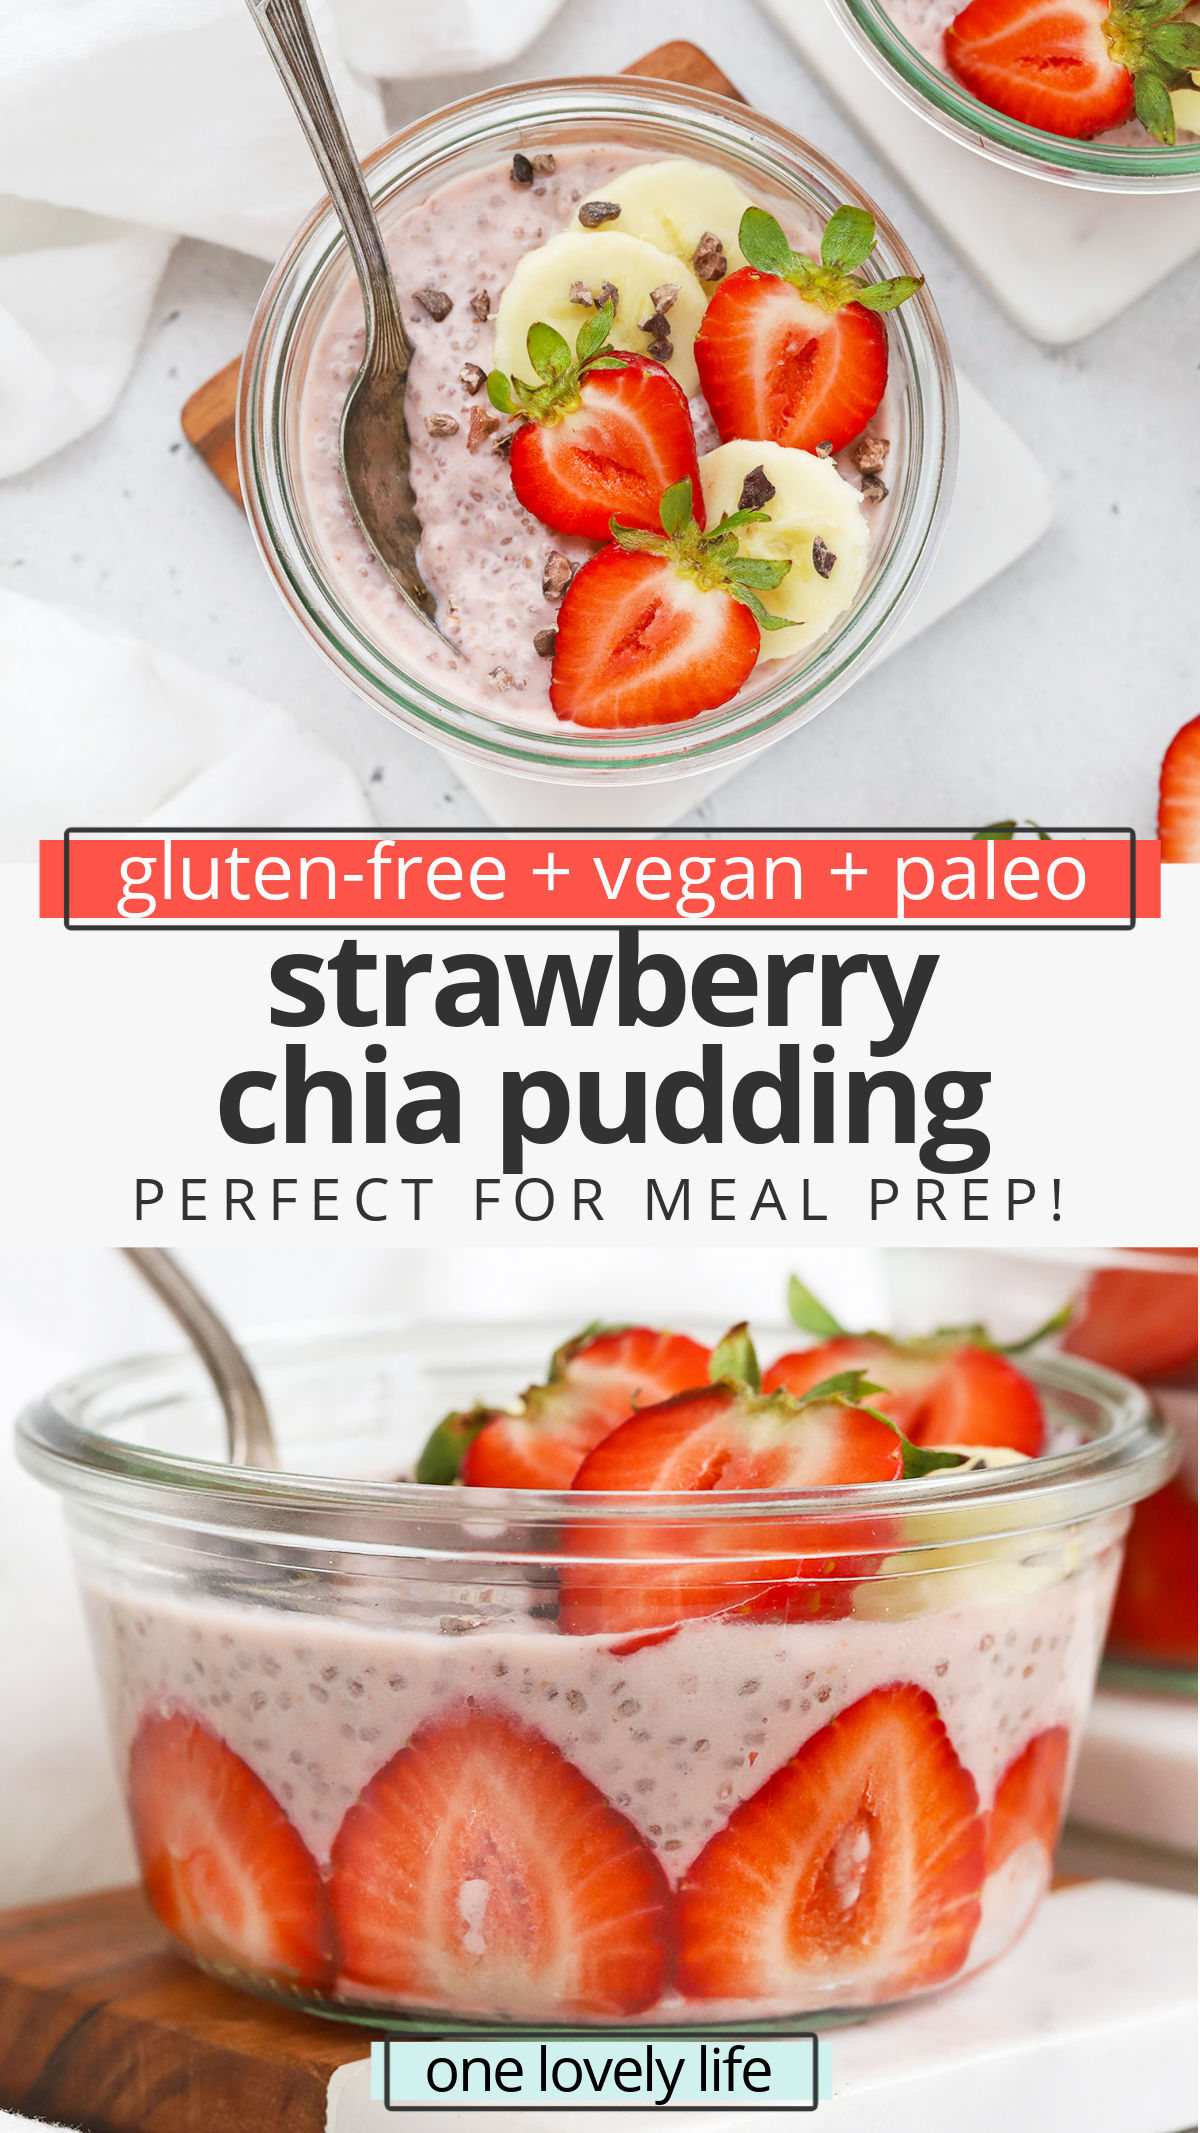 Strawberry Chia Pudding - This dreamy strawberries and cream chia pudding is a delicious healthy breakfast you can make an advance. It's perfect for meal prep! (Gluten-Free, Vegan) // Strawberry Chia Seed Pudding // Vegan breakfast // paleo breakfast // healthy breakfast #chiapudding #healthybreakfast #vegan #paleo